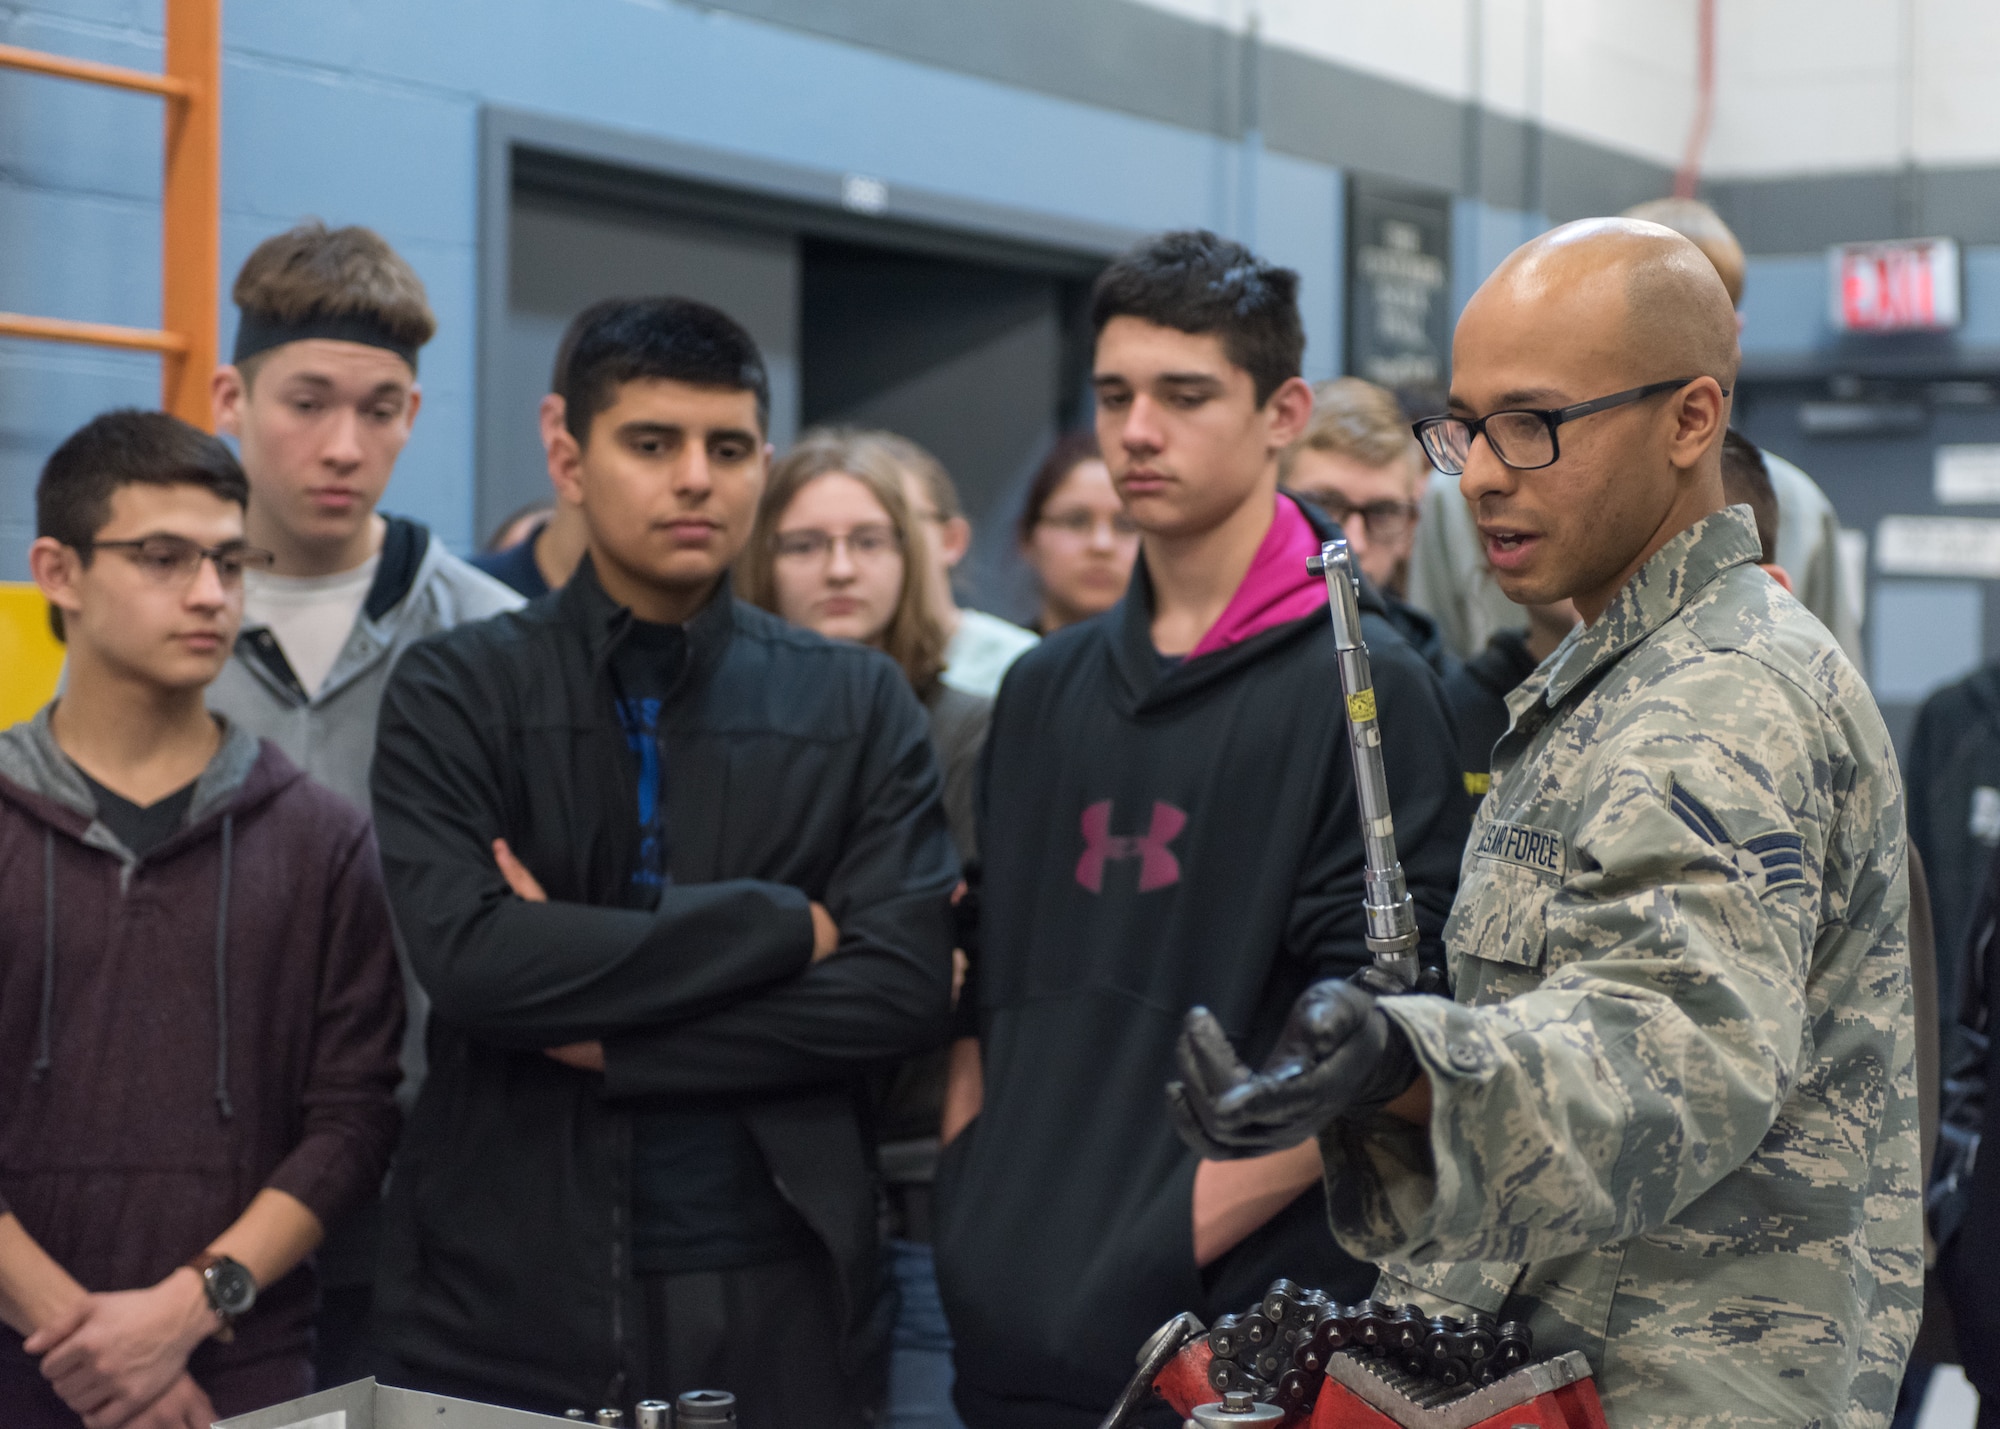 Senior Airman Angel Sanchez, 55th Maintenance Squadron Consolidated Support Flight aircraft hydraulics journeyman speaks to students from Bellevue East High School Feb. 27, 2018 at Offutt Air Force Base, Nebraska. The tour highlighted the roles that both military and civilian Airmen hold here and what it takes to keep Offutt AFB’s aircraft mission ready. (U.S. Air Force photo by Senior Airman Jacob Skovo)